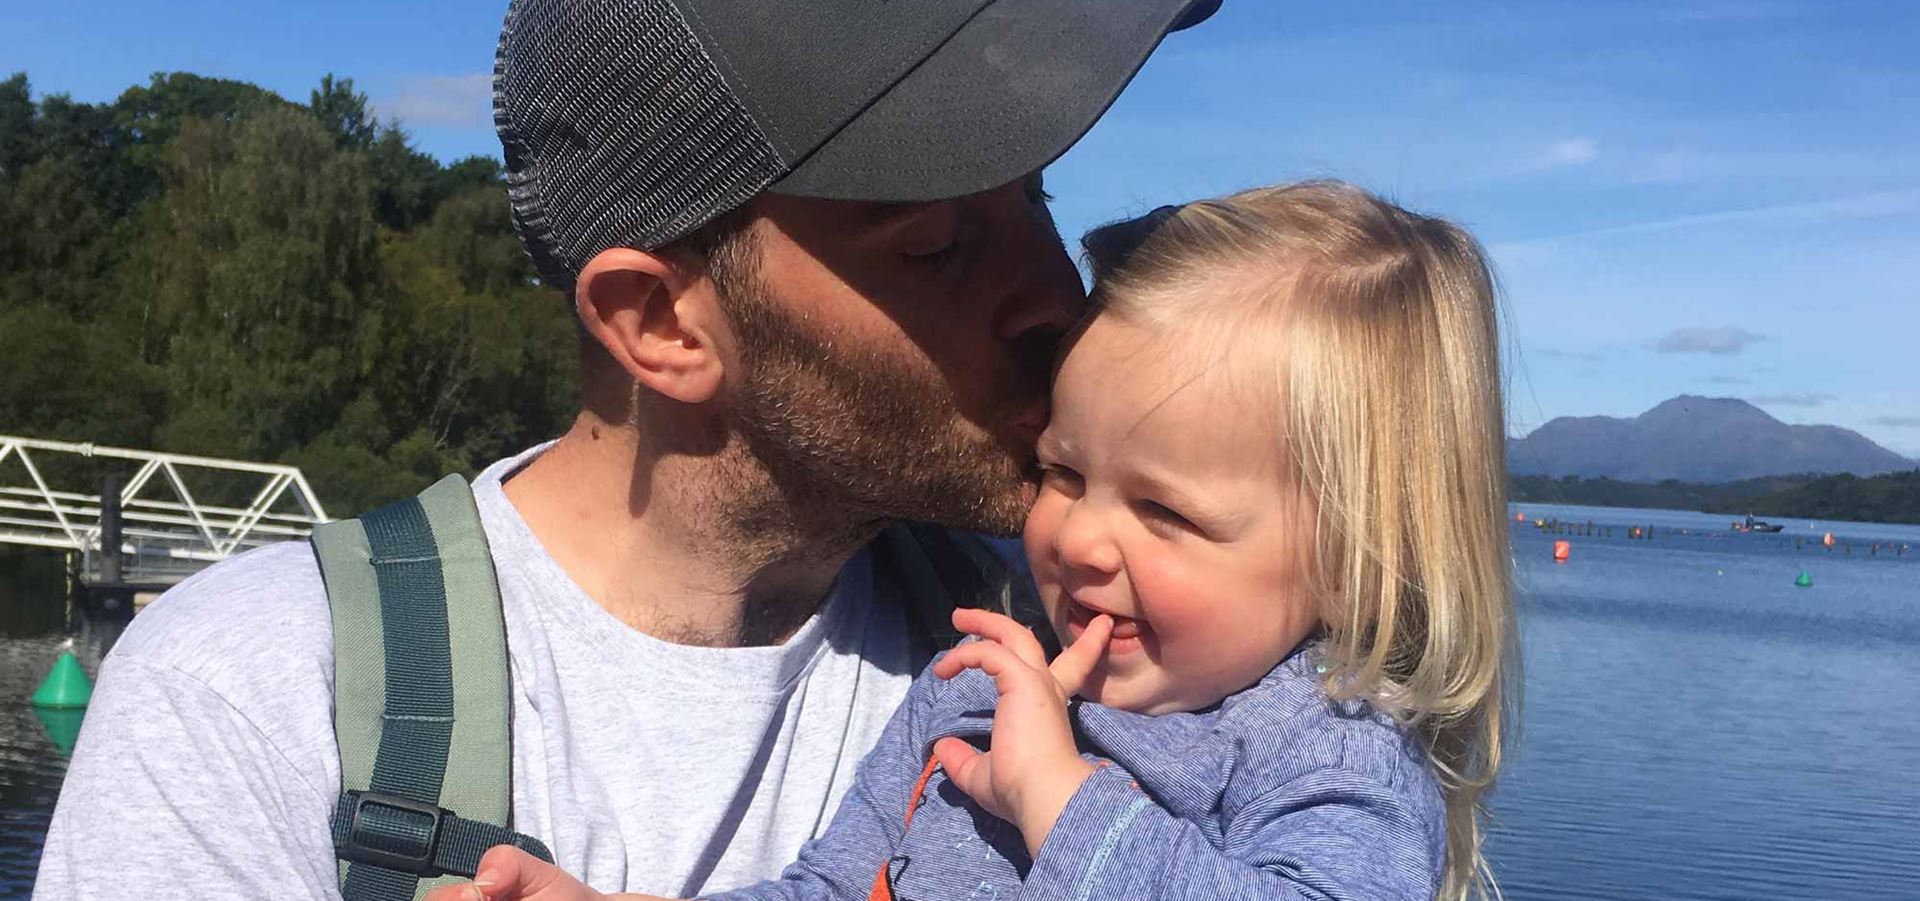 Adam holding his daughter Skye outside and kissing her on the cheek